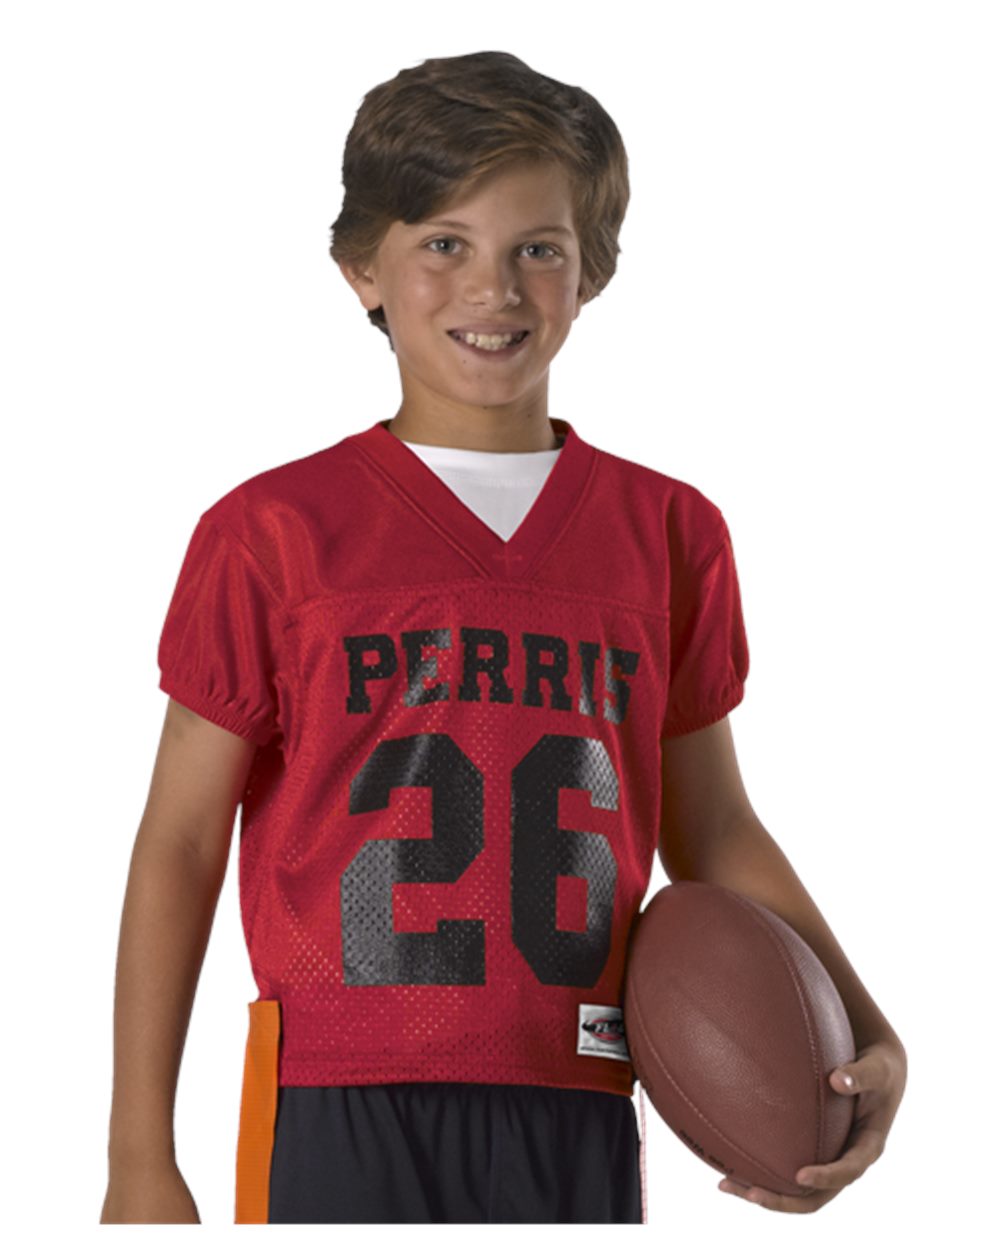 Alleson Athletic Youth Practice Football Jersey